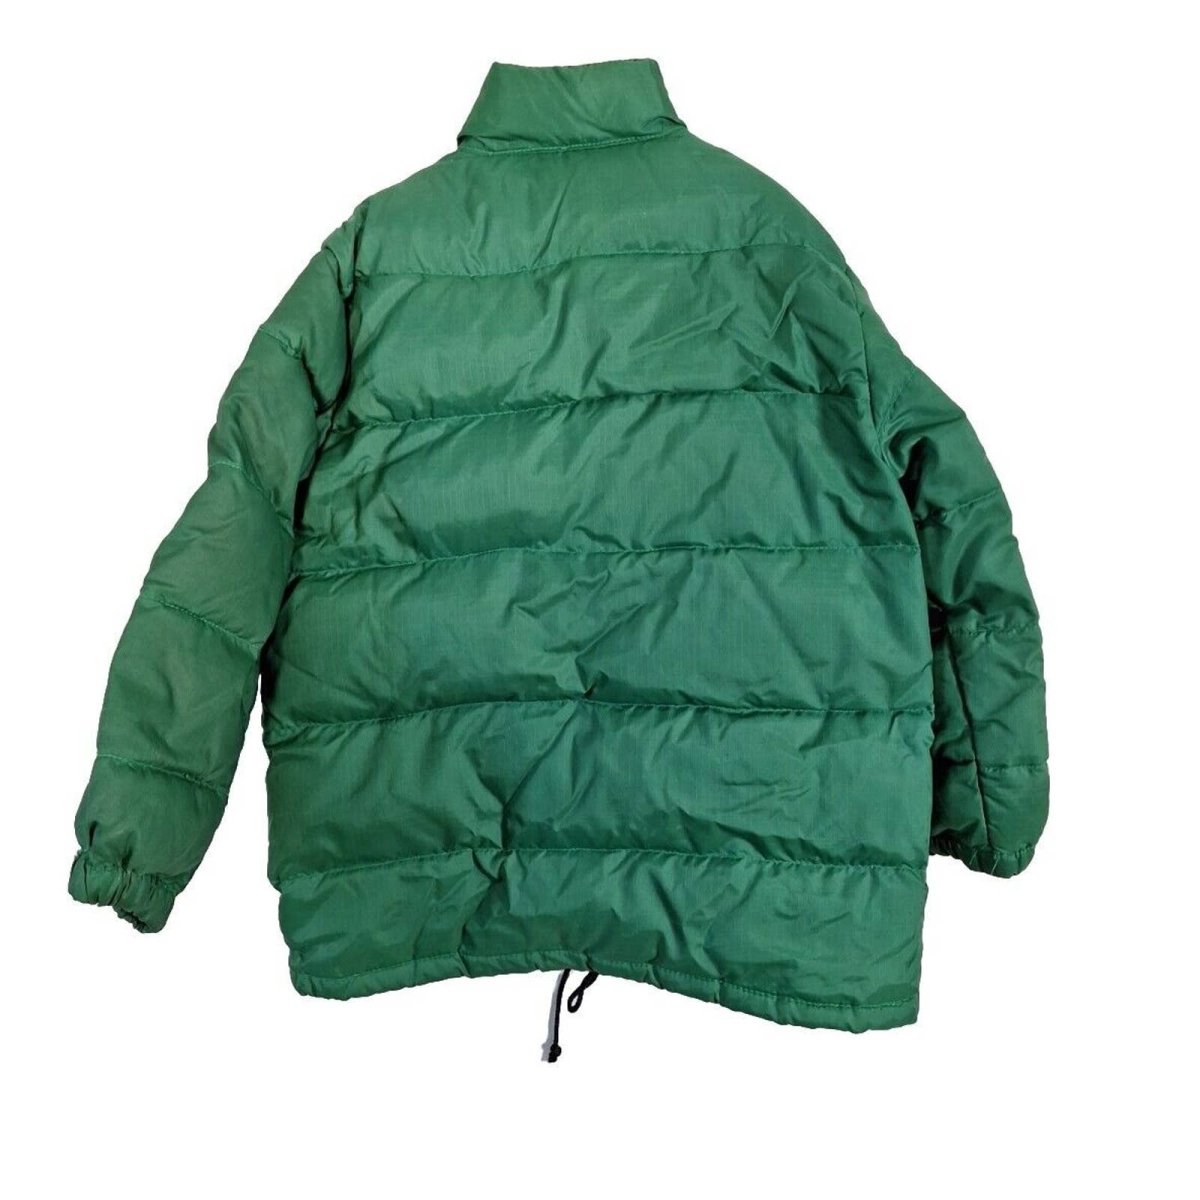 Vintage 80s Kids Green Down Puffer Jacket Unisex Kids Size 6 - themallvintage The Mall Vintage